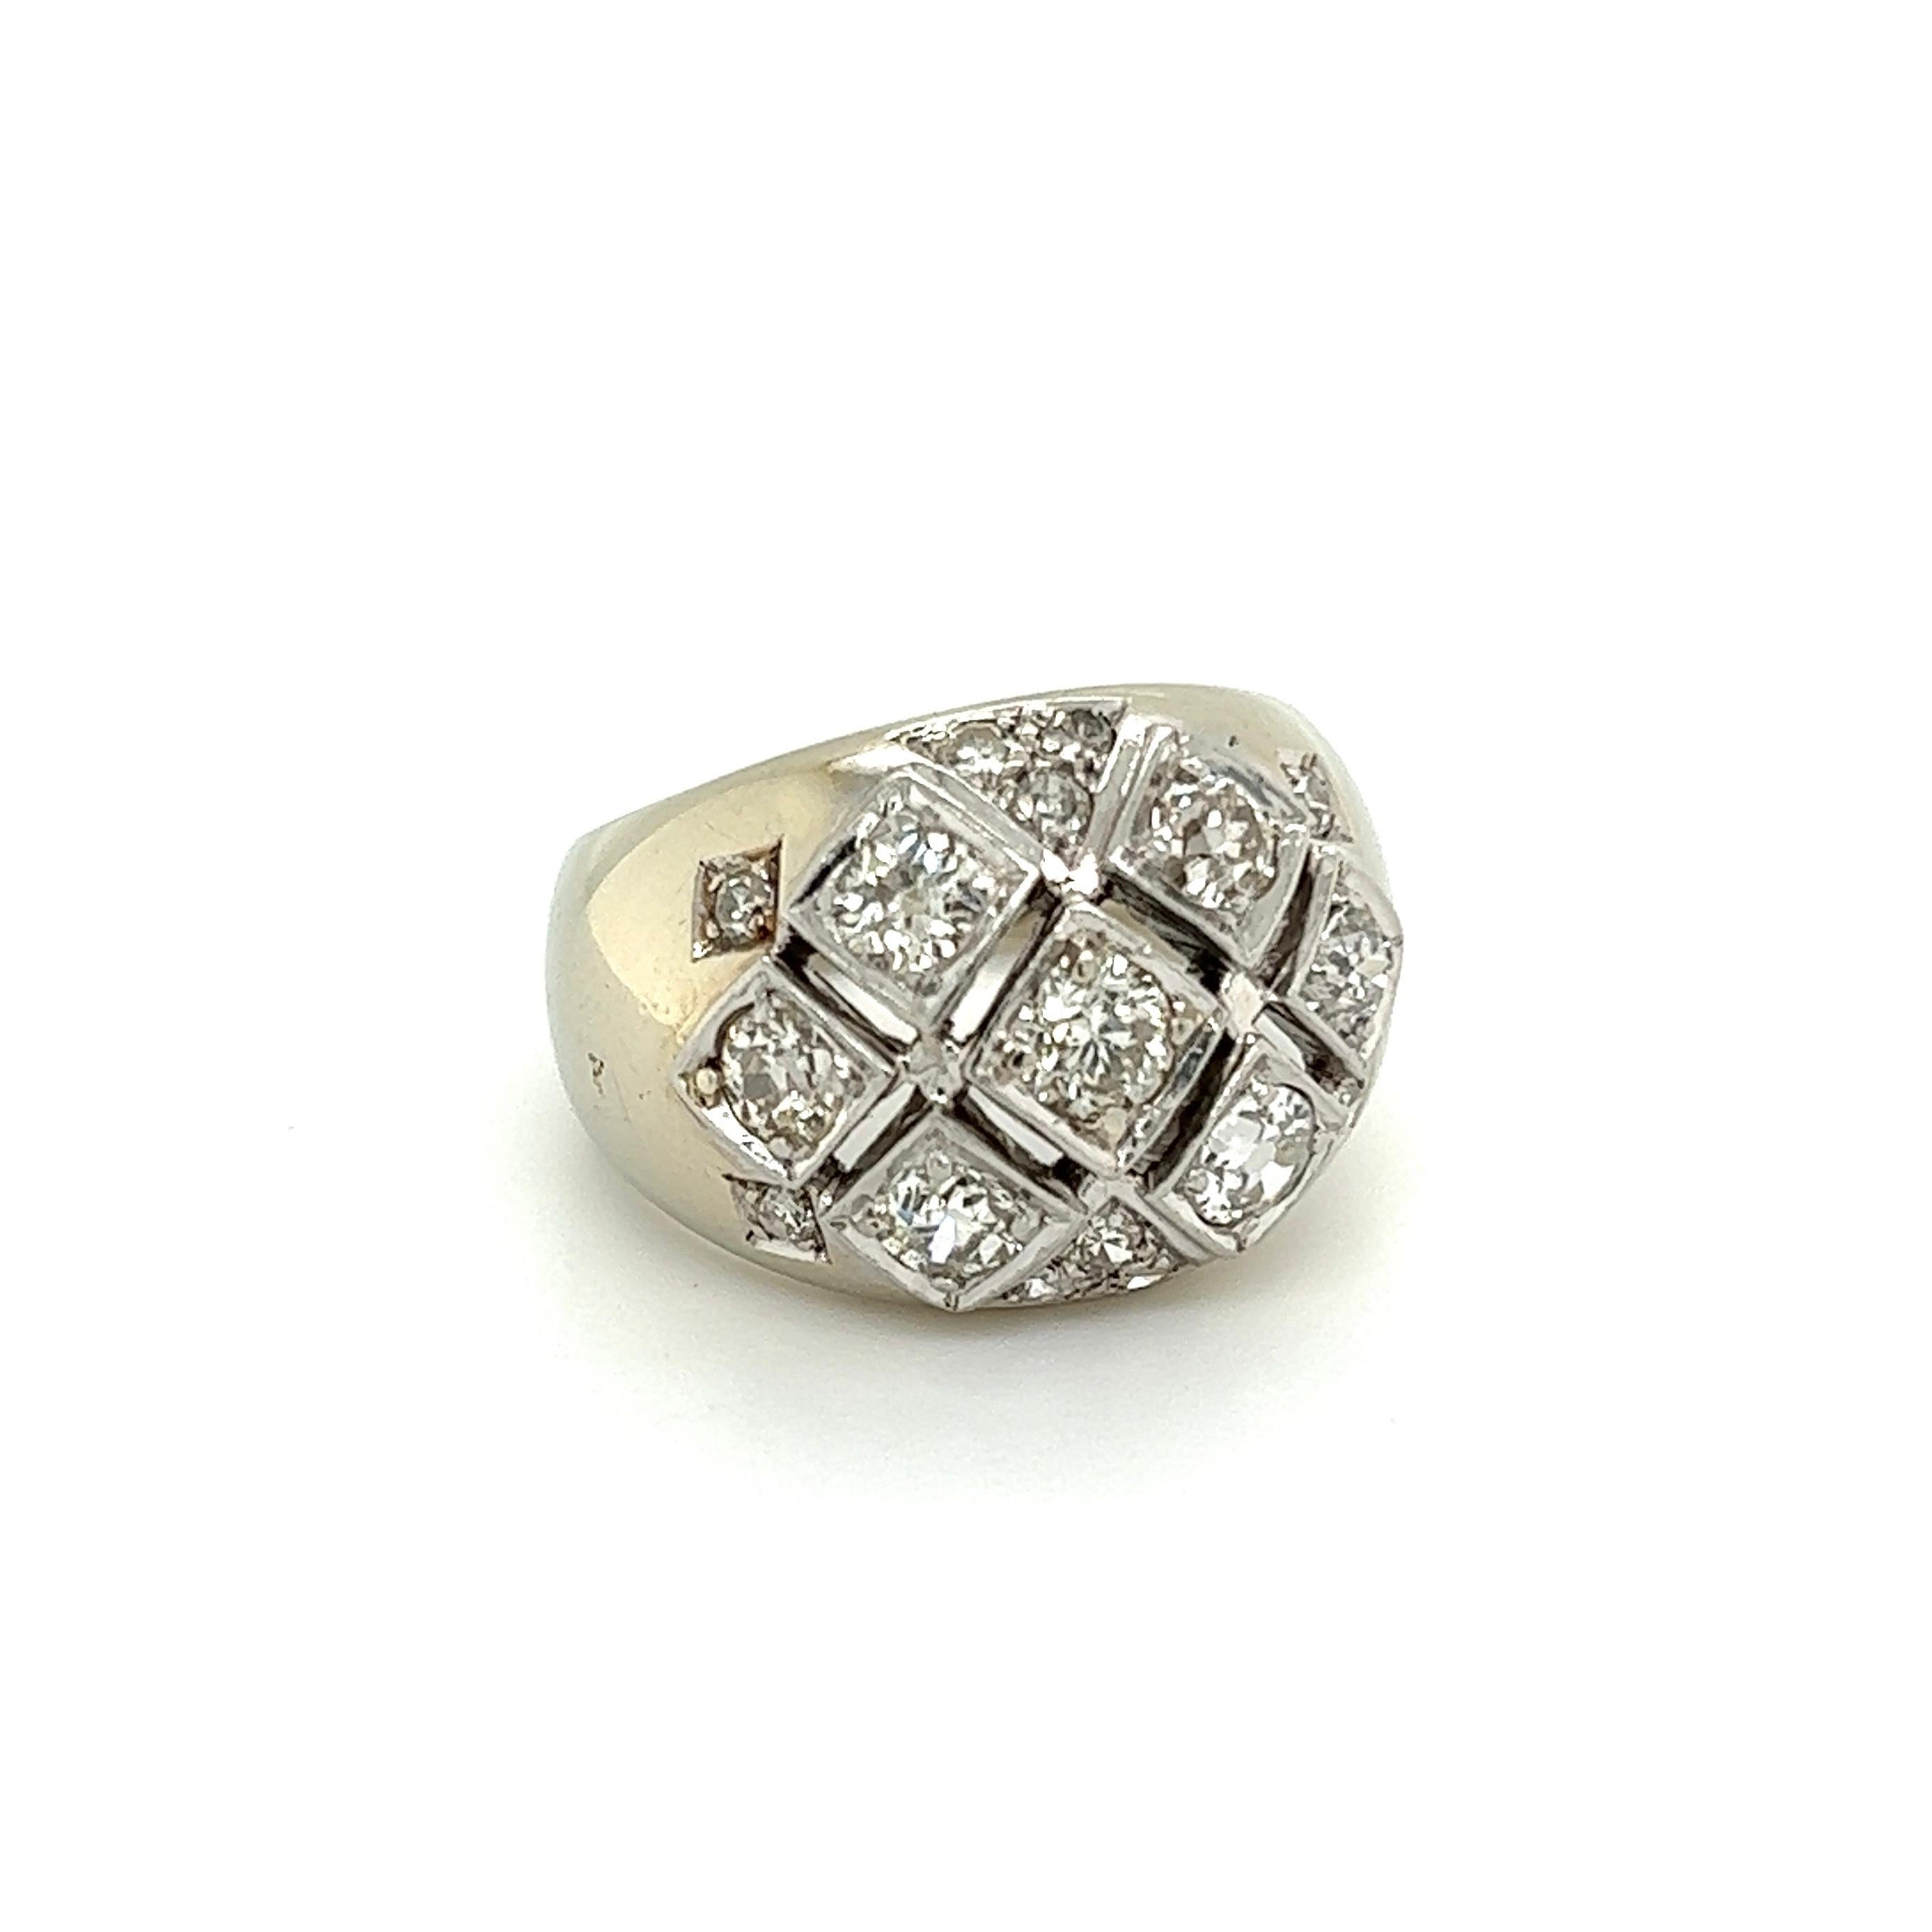 Simply Beautiful! Striking and Finely detailed Diamond Gold 14mm Dome Cluster Ring. Hand set with Scattered Old Cut Diamonds, weighing approx. 1.40tcw. Measuring approx. 0.90” l x 0.79” w x 0.55” h. Hand crafted in 14 Karat White Gold. Ring size